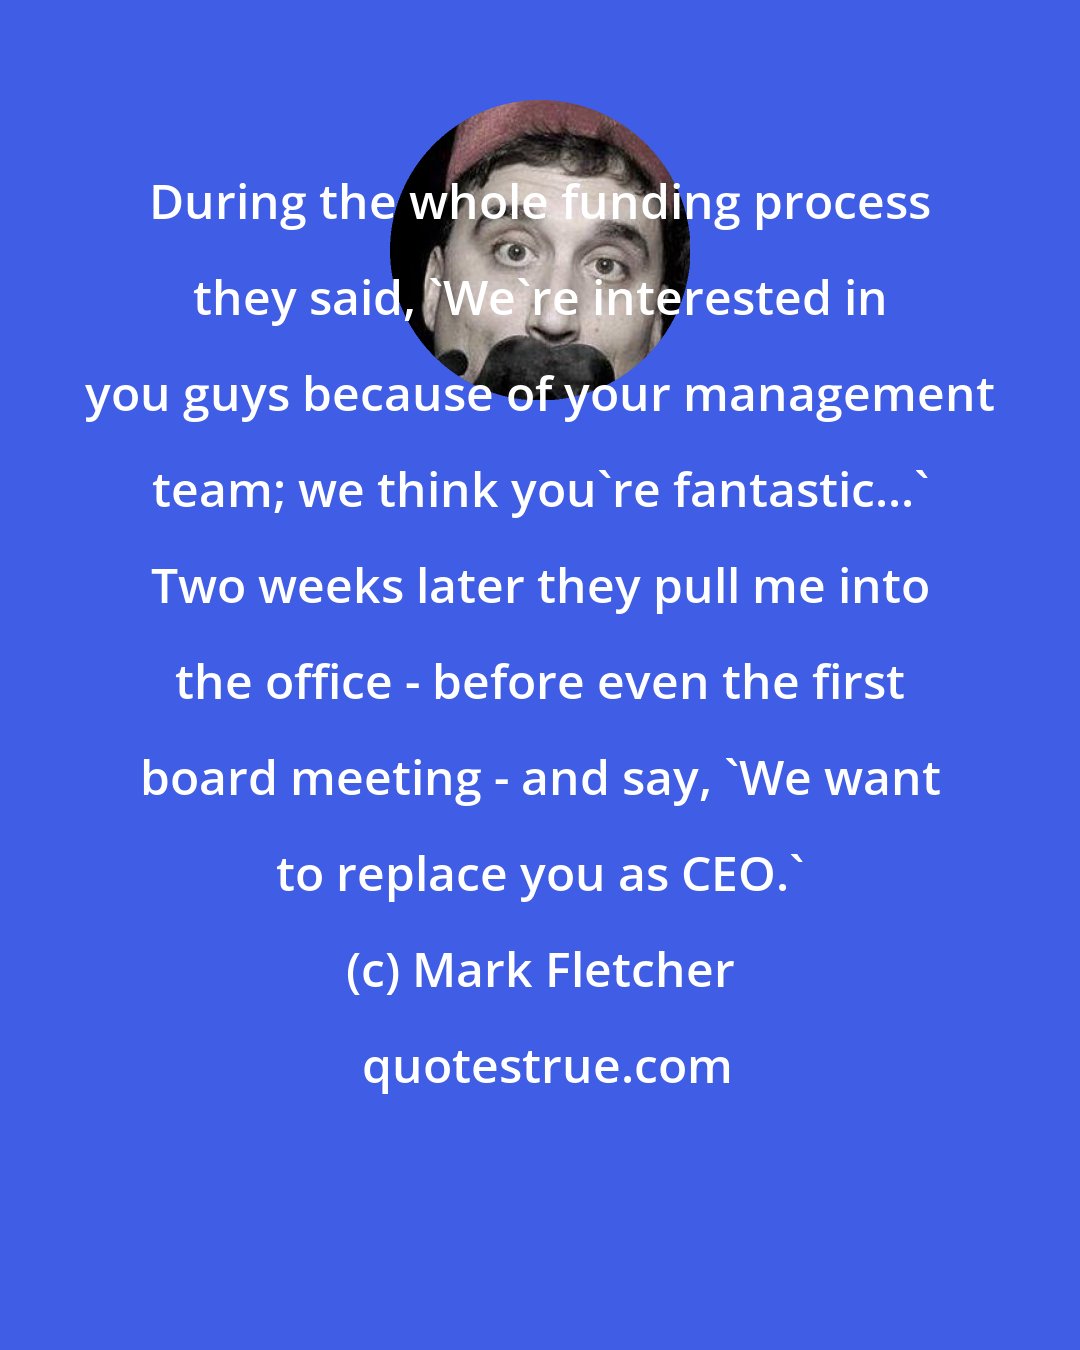 Mark Fletcher: During the whole funding process they said, 'We're interested in you guys because of your management team; we think you're fantastic...' Two weeks later they pull me into the office - before even the first board meeting - and say, 'We want to replace you as CEO.'